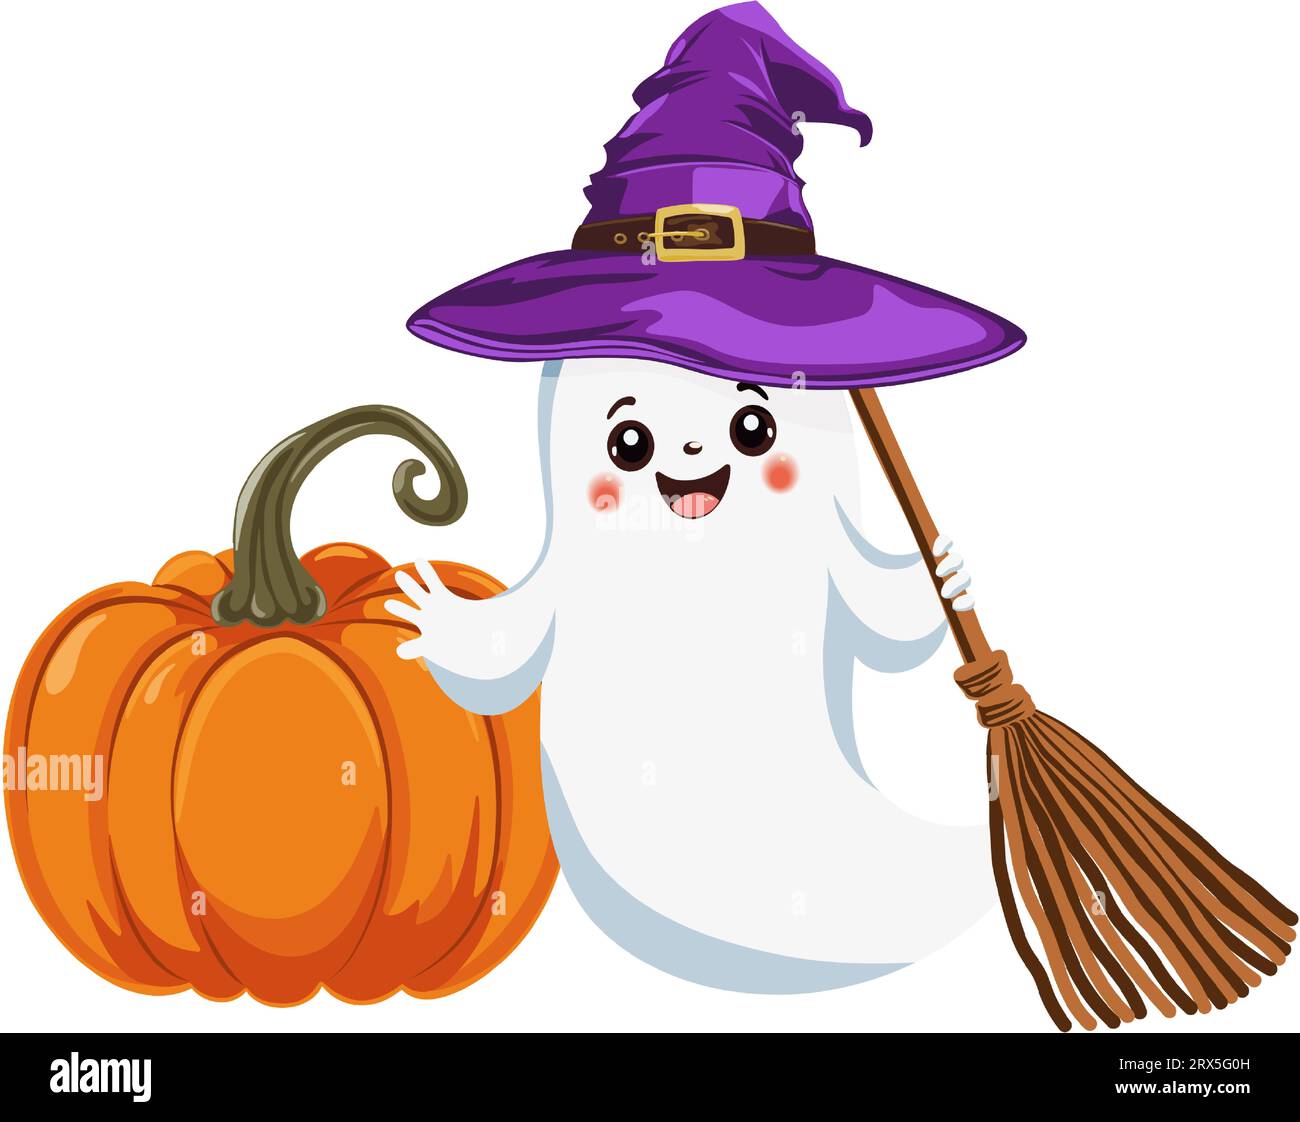 Halloween pumpkin and a cute ghost in a purple witch hat and a broom in his hand. Traditional symbol and design element for Halloween celebration. Car Stock Vector